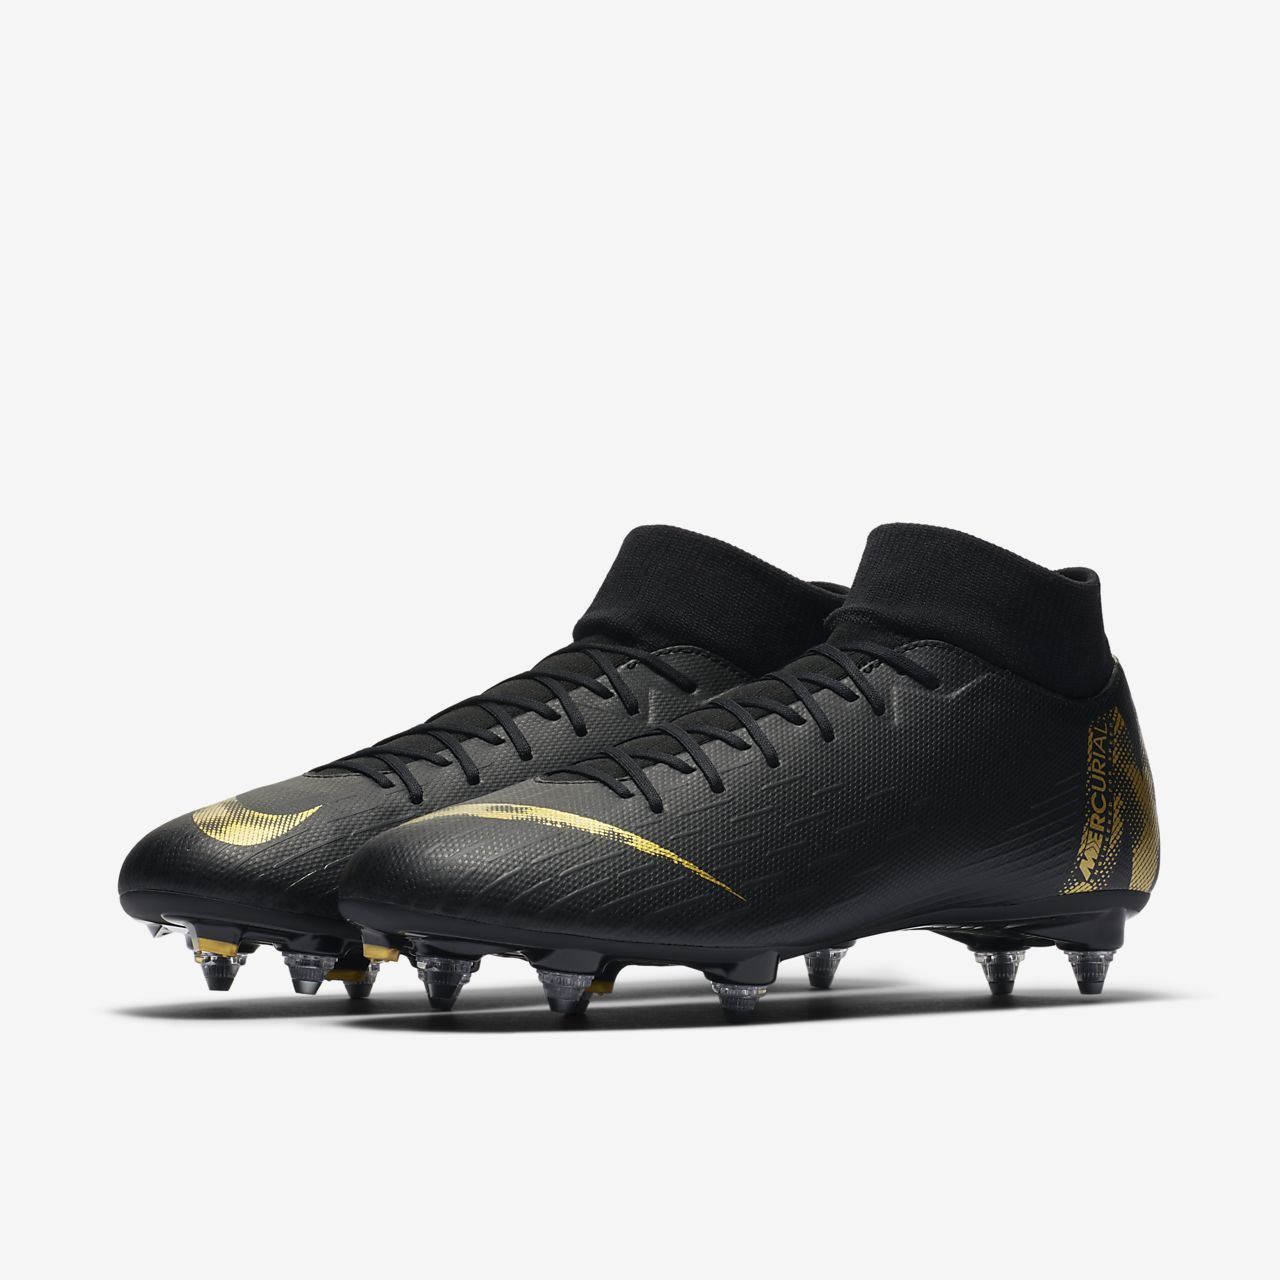 Buy Nike Mercurial Superfly VI Pro AG PRO C $ 228 Today.